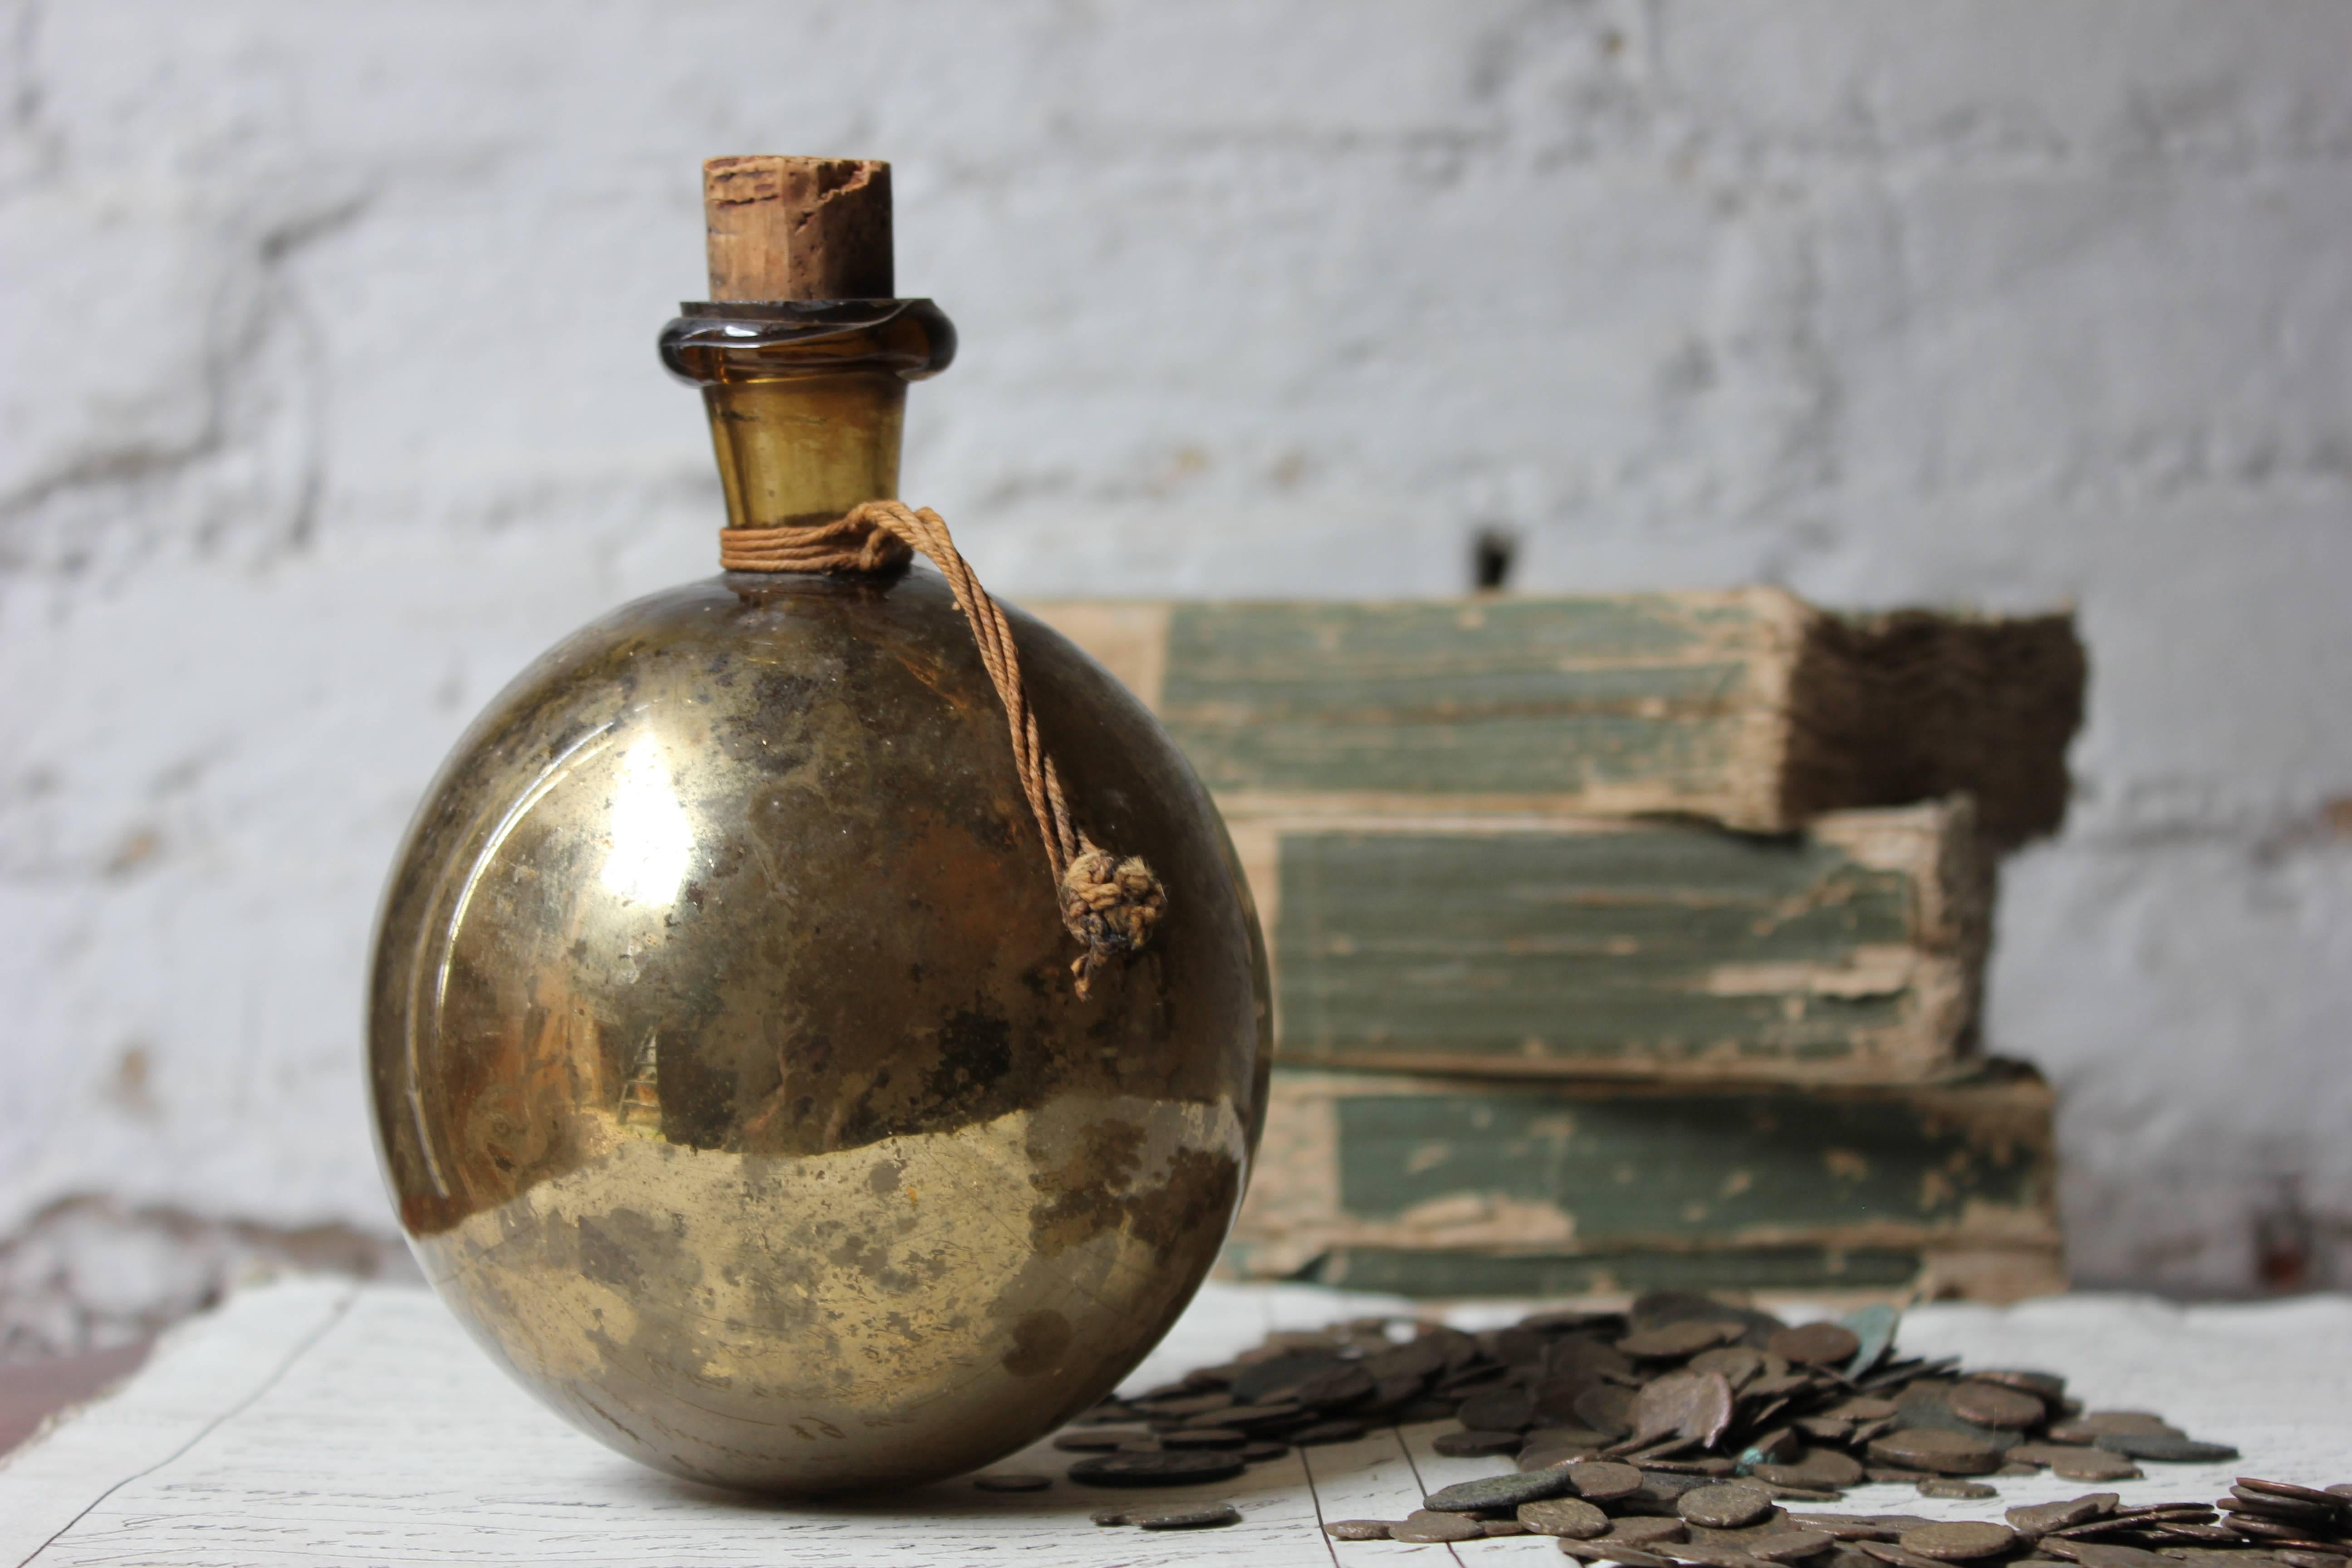 Early Victorian Early Gold Mercury Glass Witches Ball or Bottle, circa 1820-1850